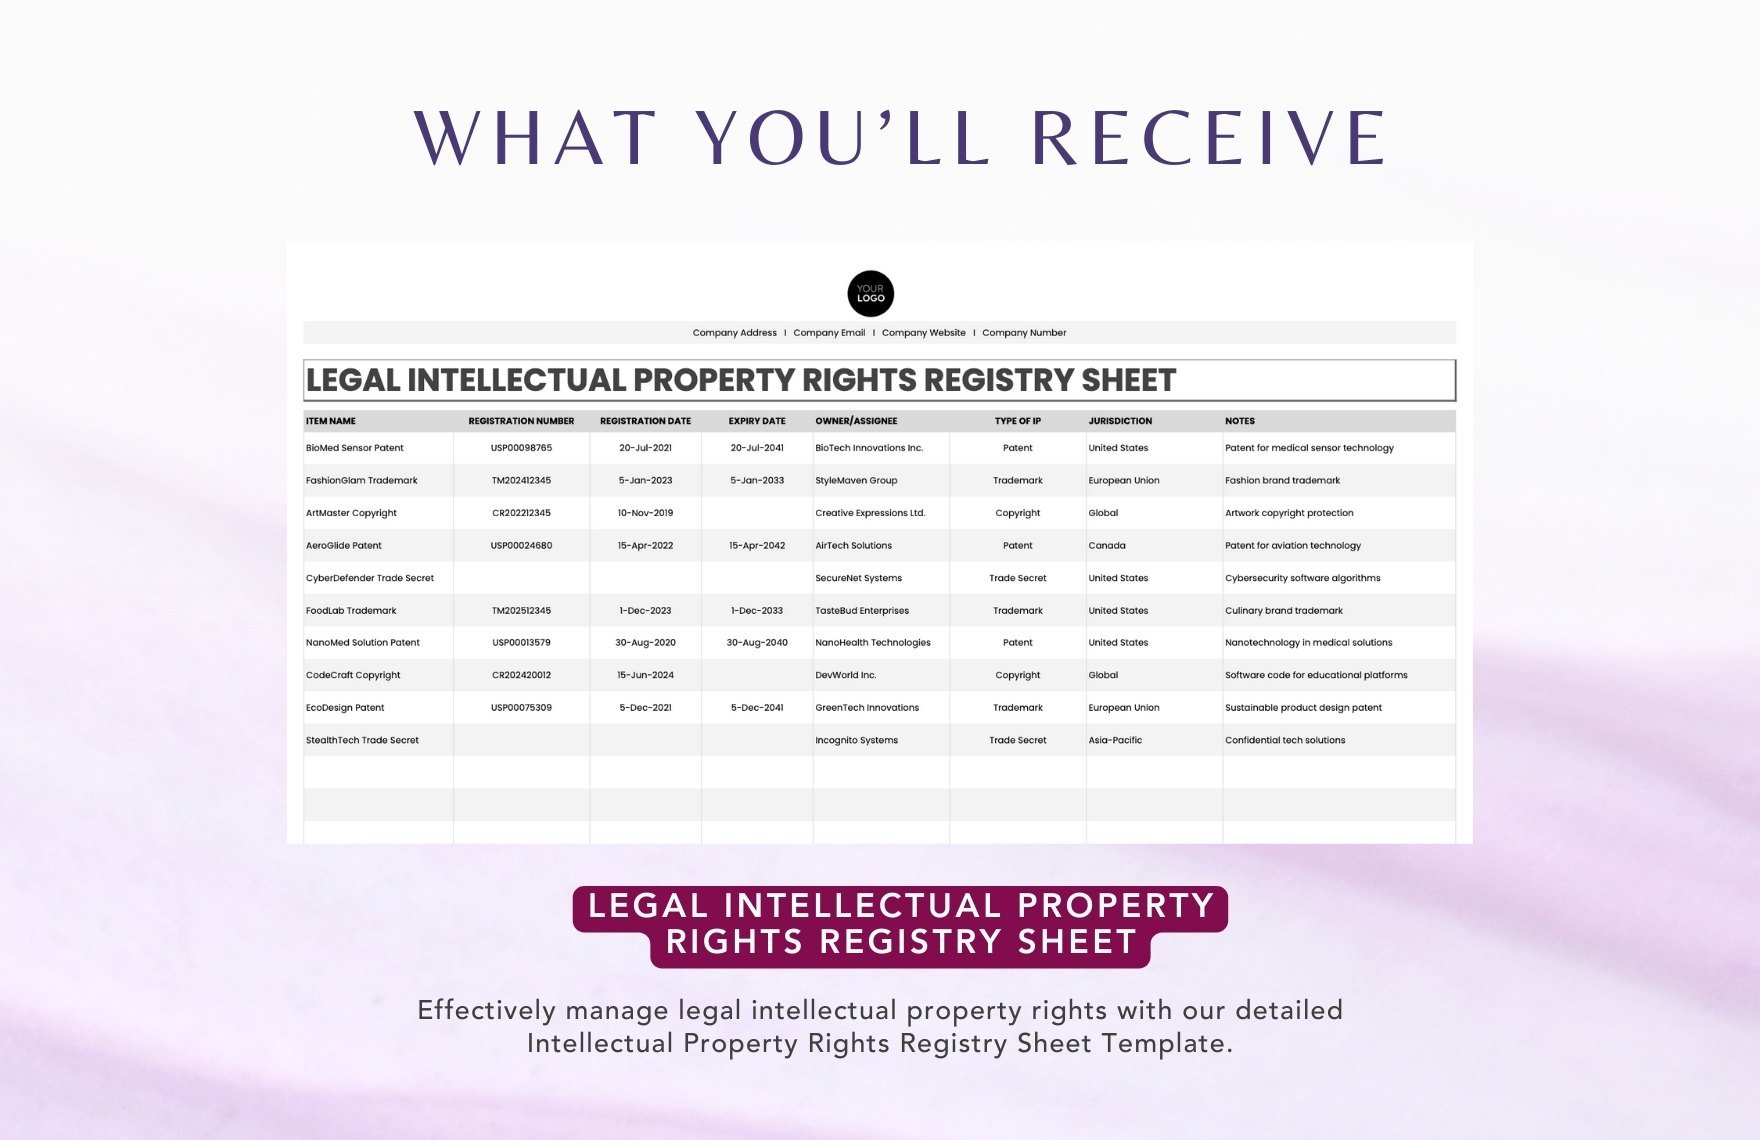 Legal Intellectual Property Rights Registry Sheet Template